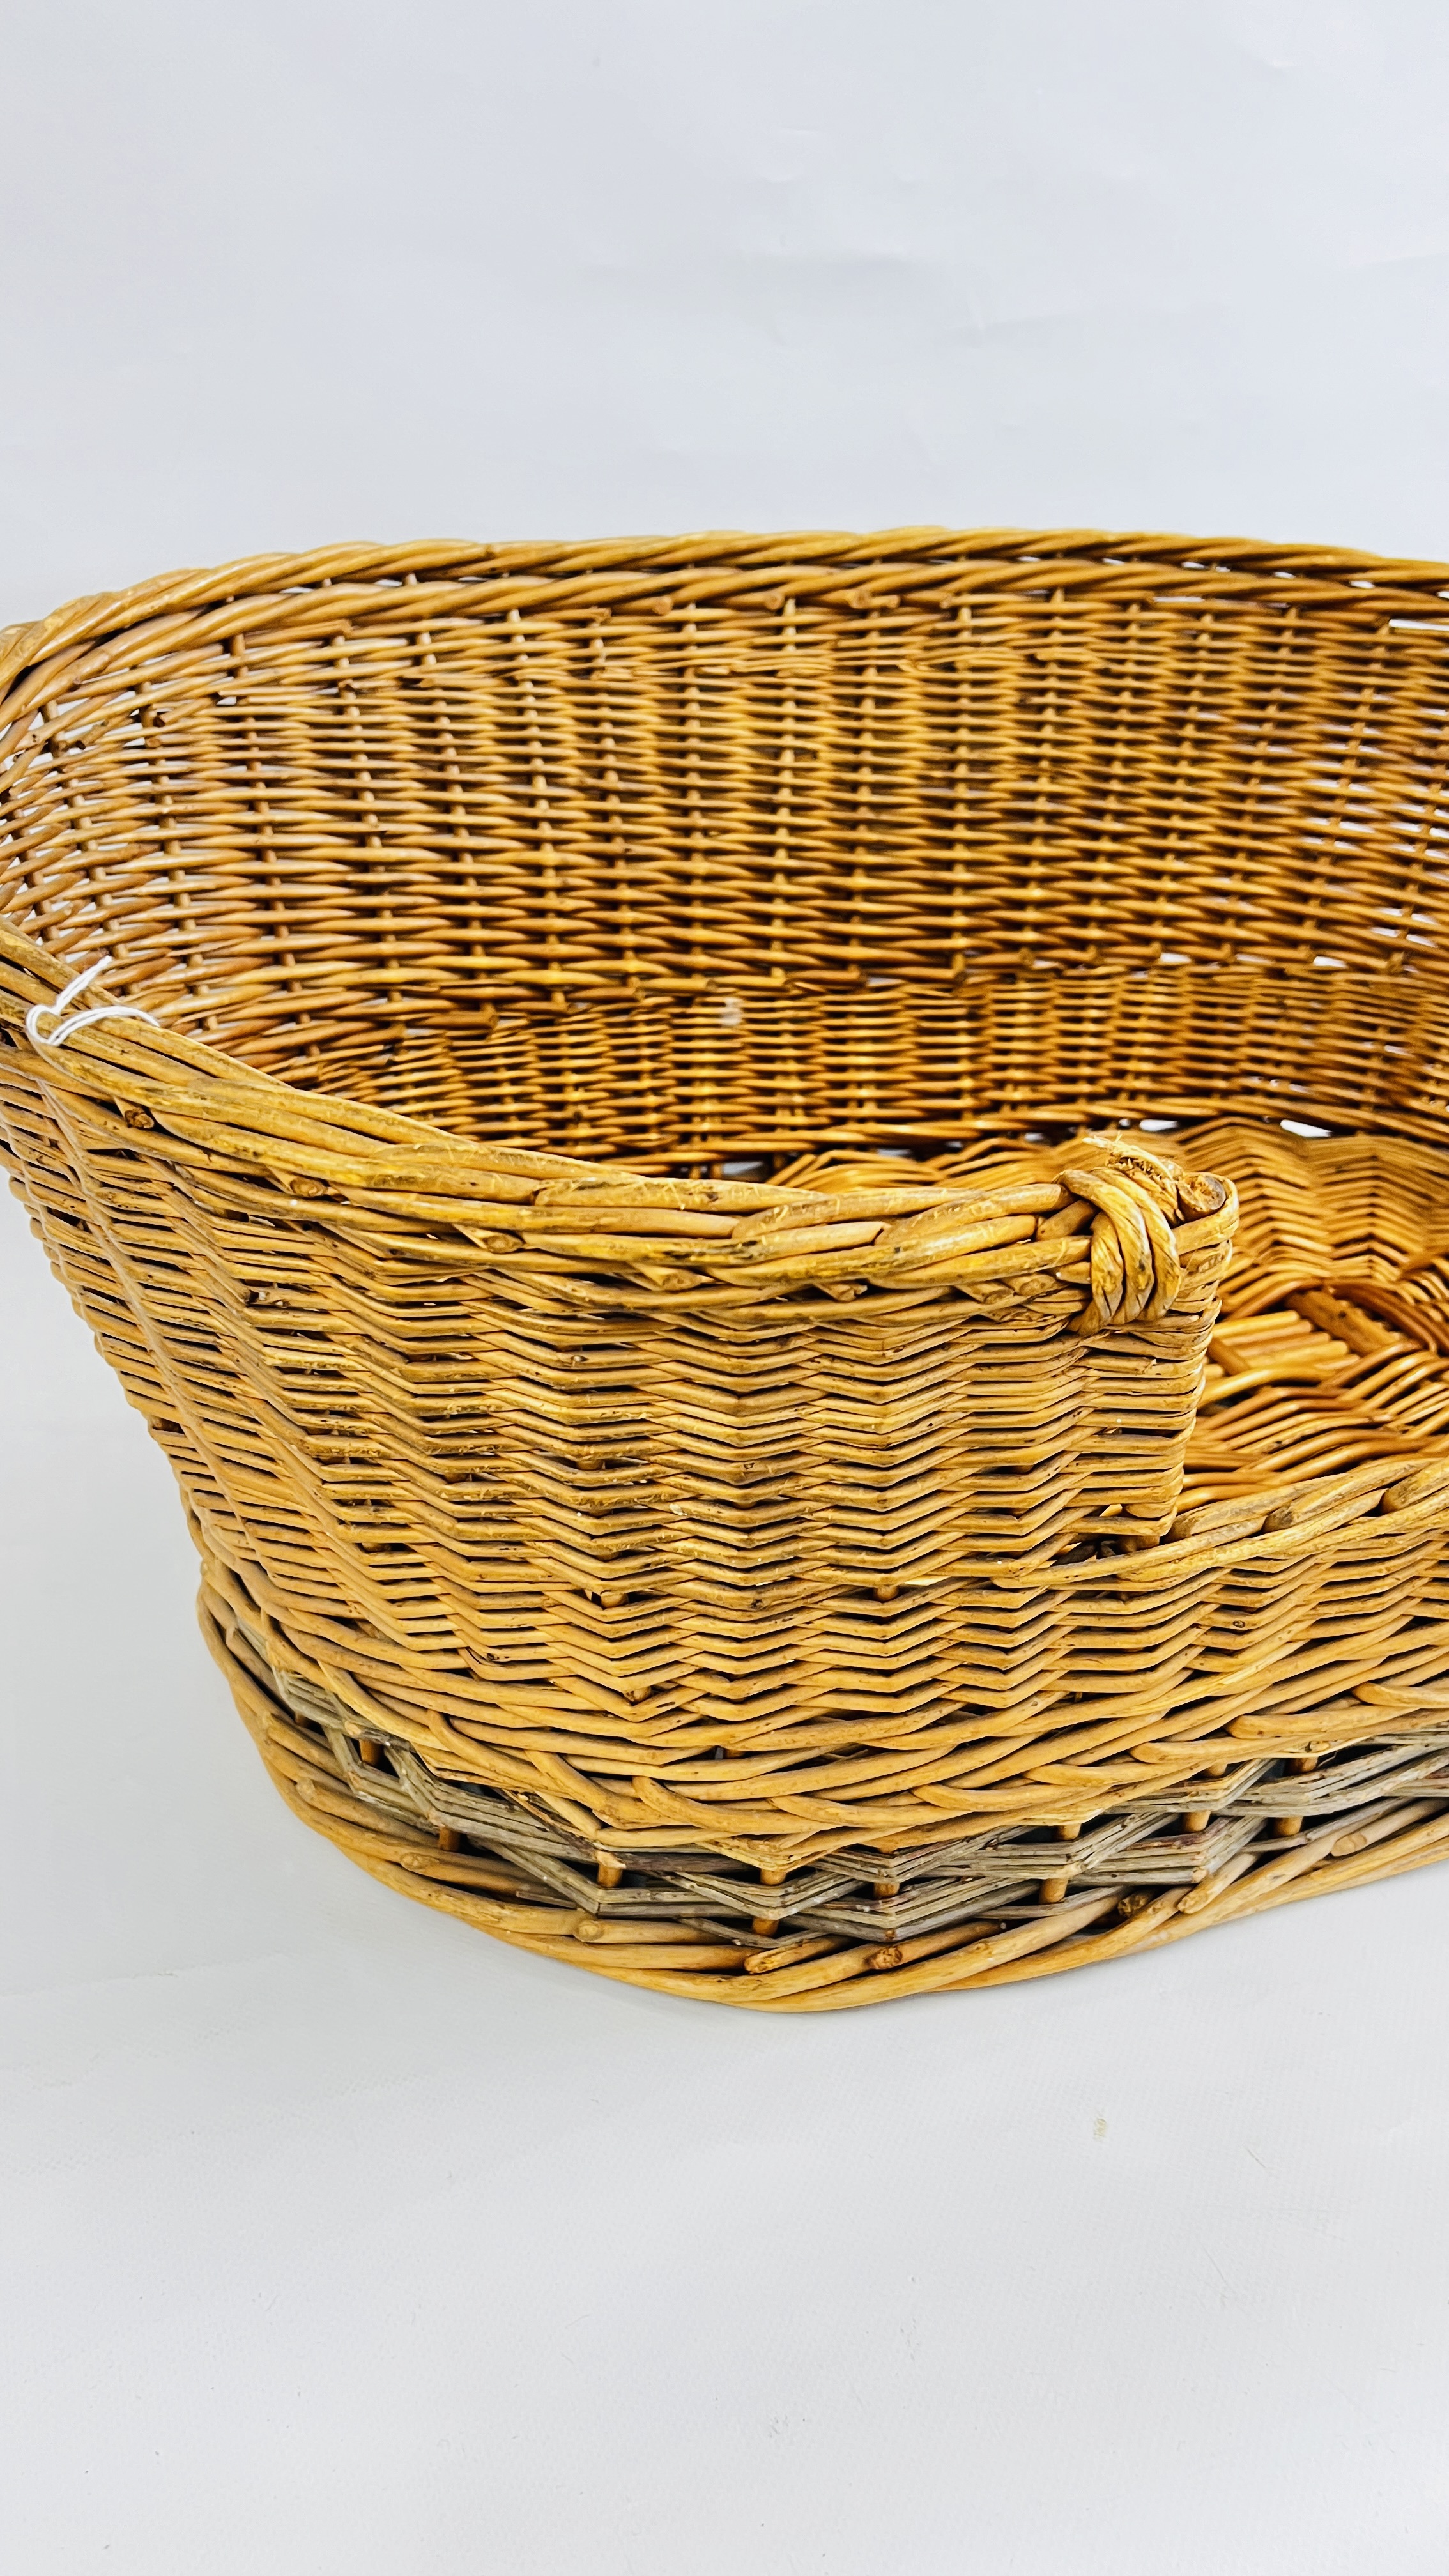 A TRADITIONAL WICKER PET BASKET. - Image 2 of 2